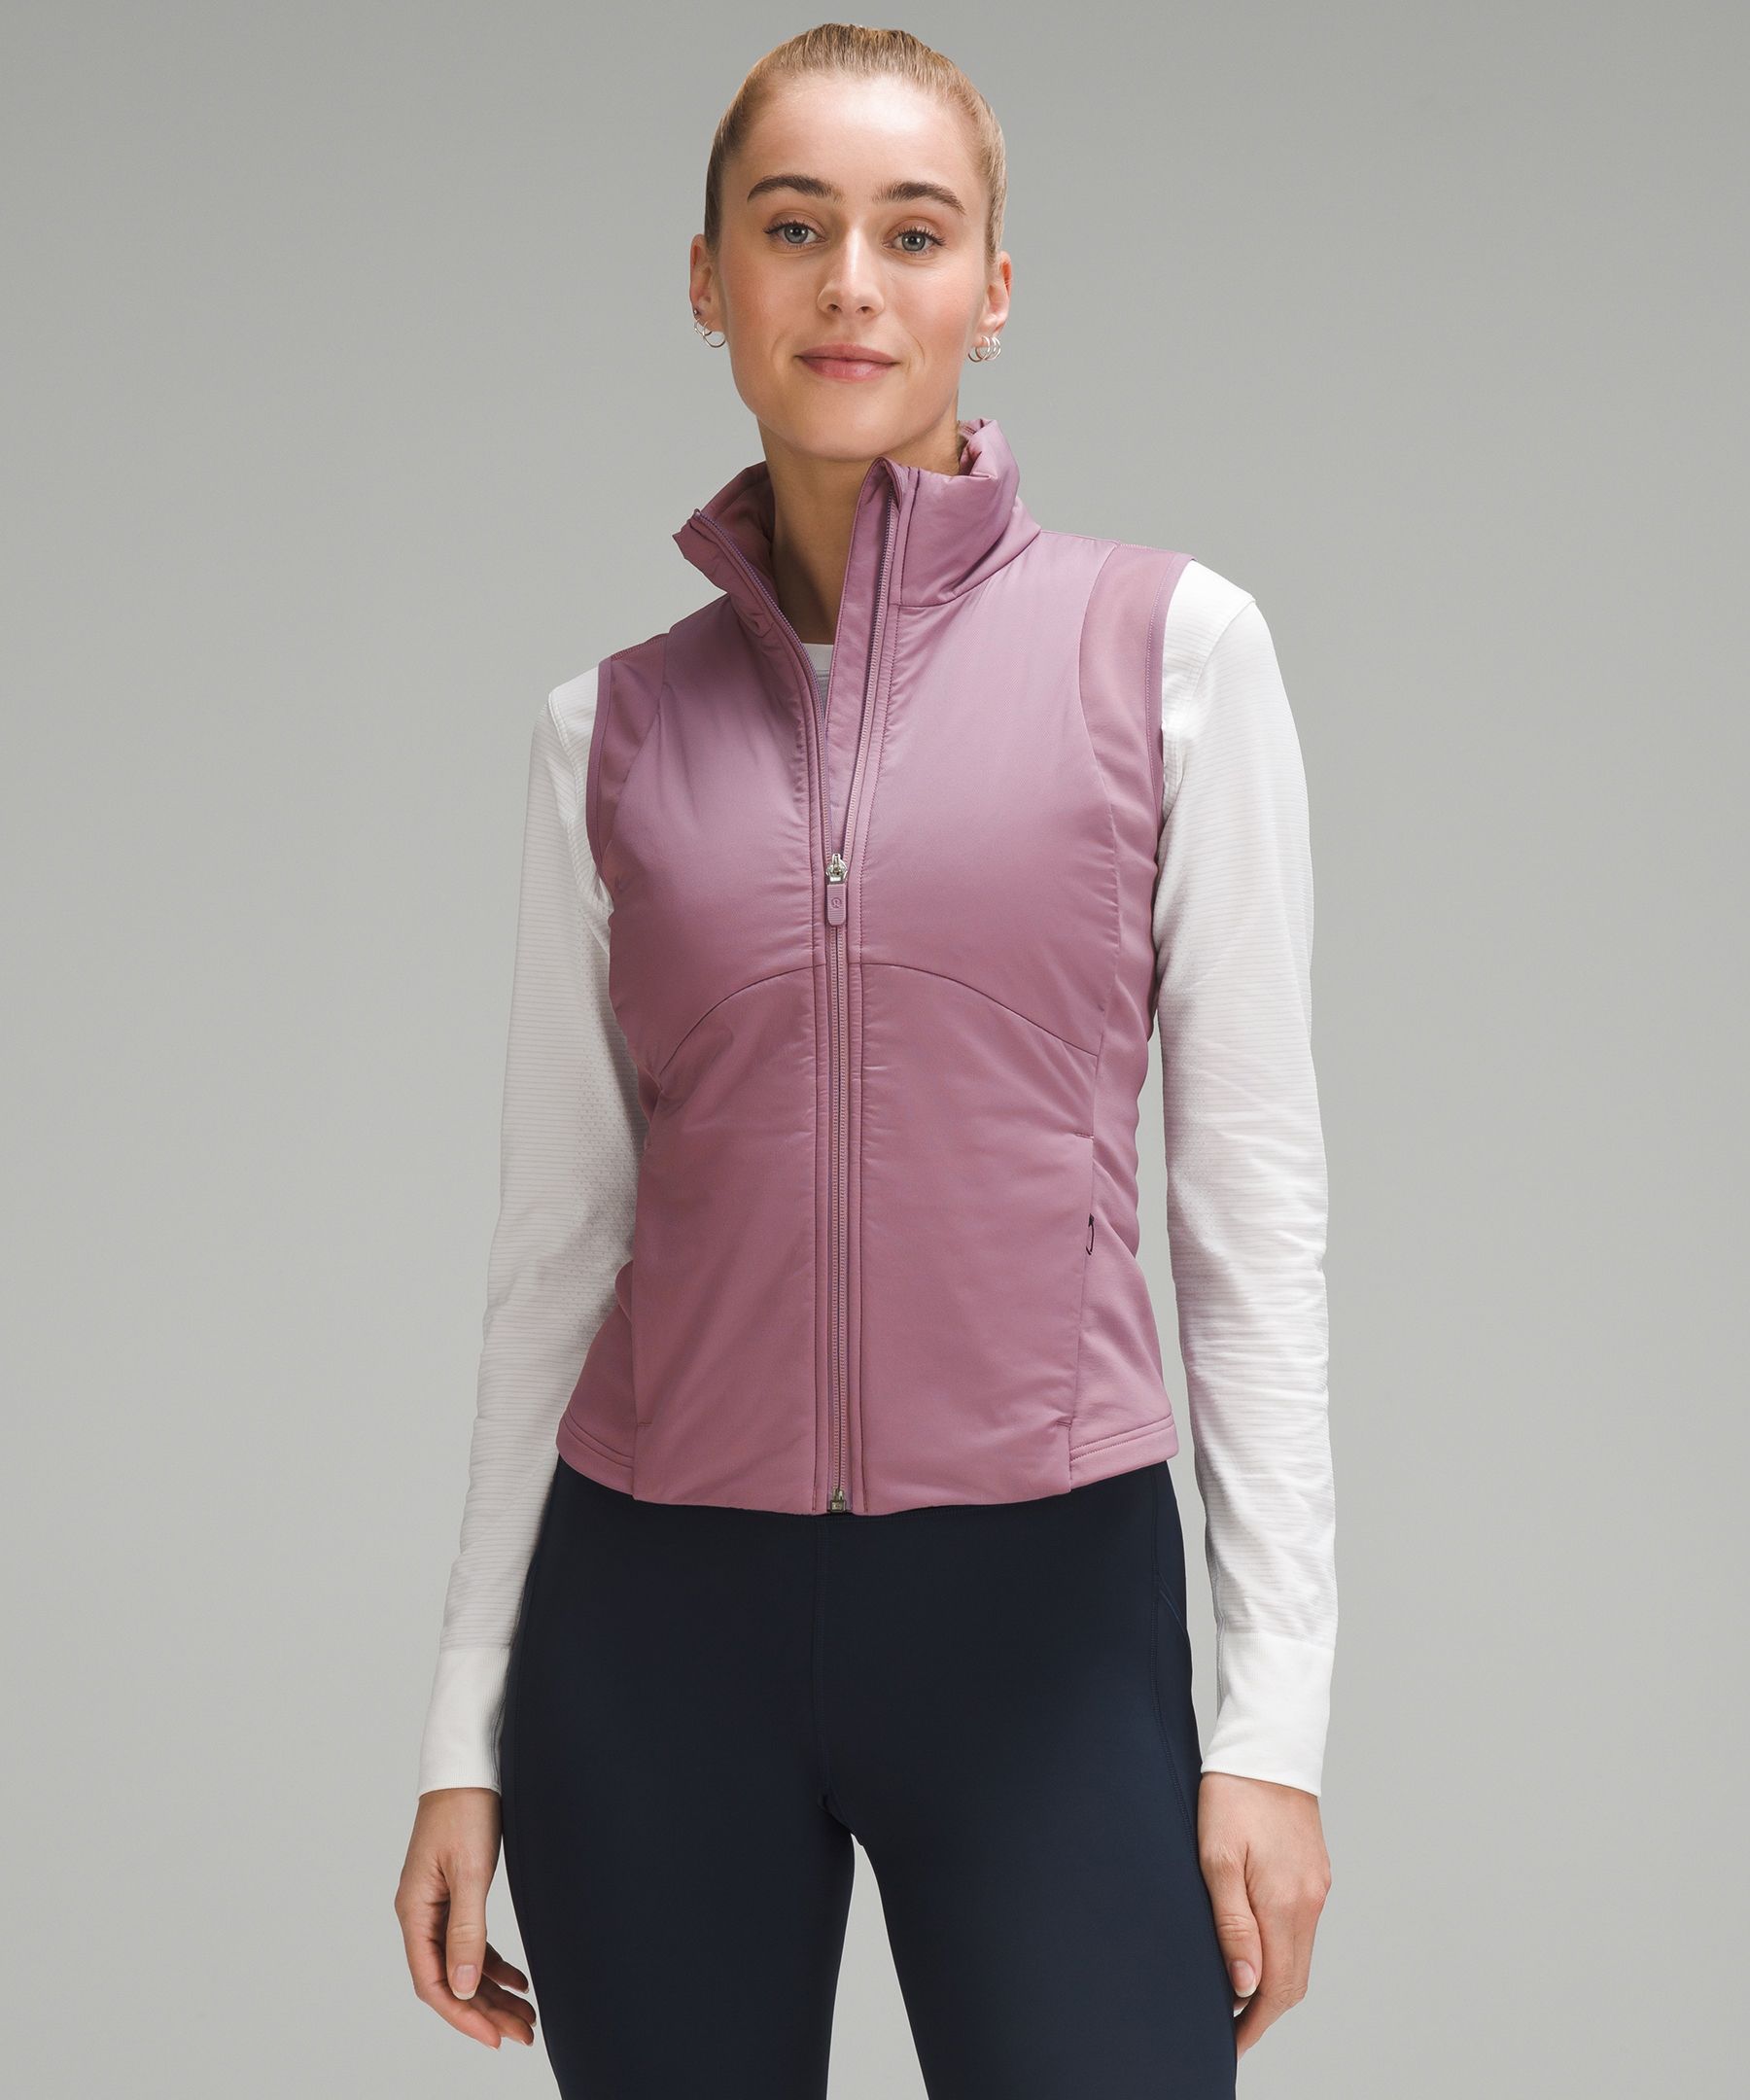 Push Your Pace Vest, Coats and Jackets